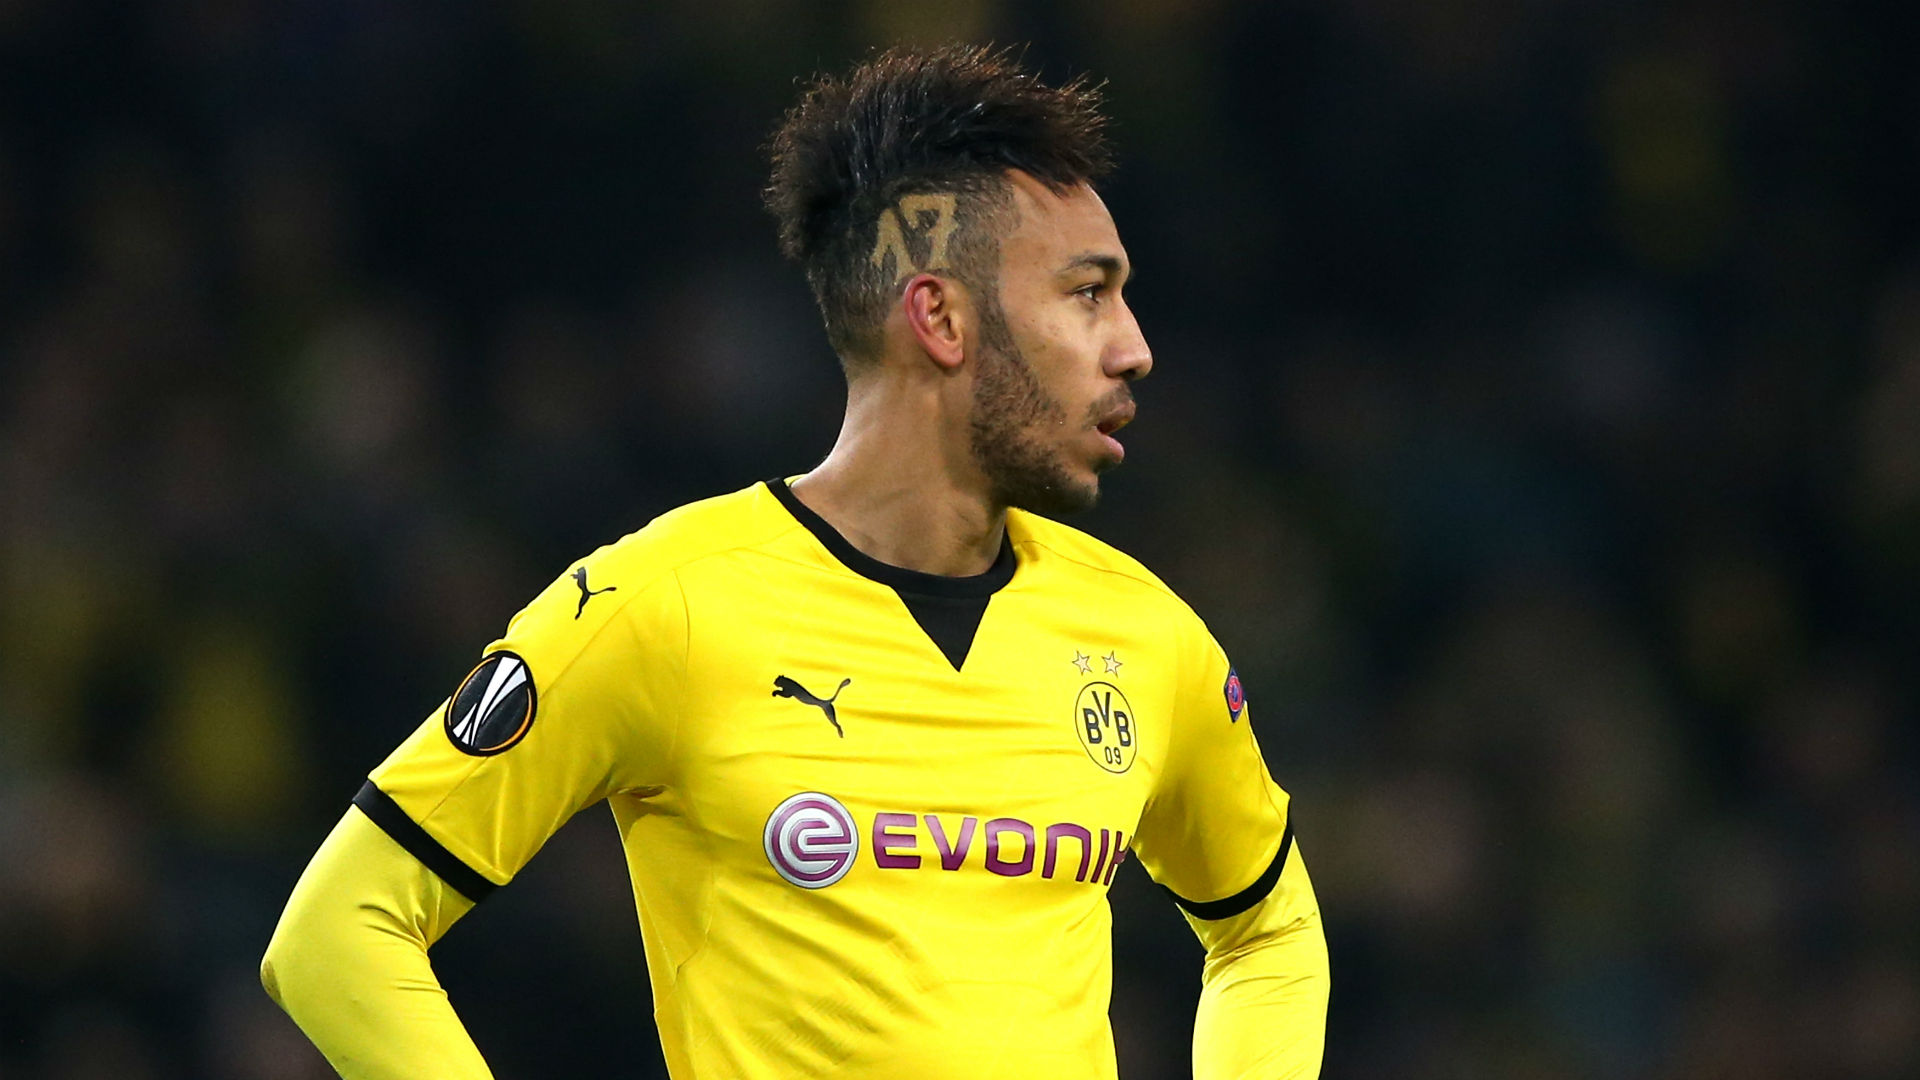 Pierre-emerick Aubameyang Wallpapers - Paco Alcacer , HD Wallpaper & Backgrounds